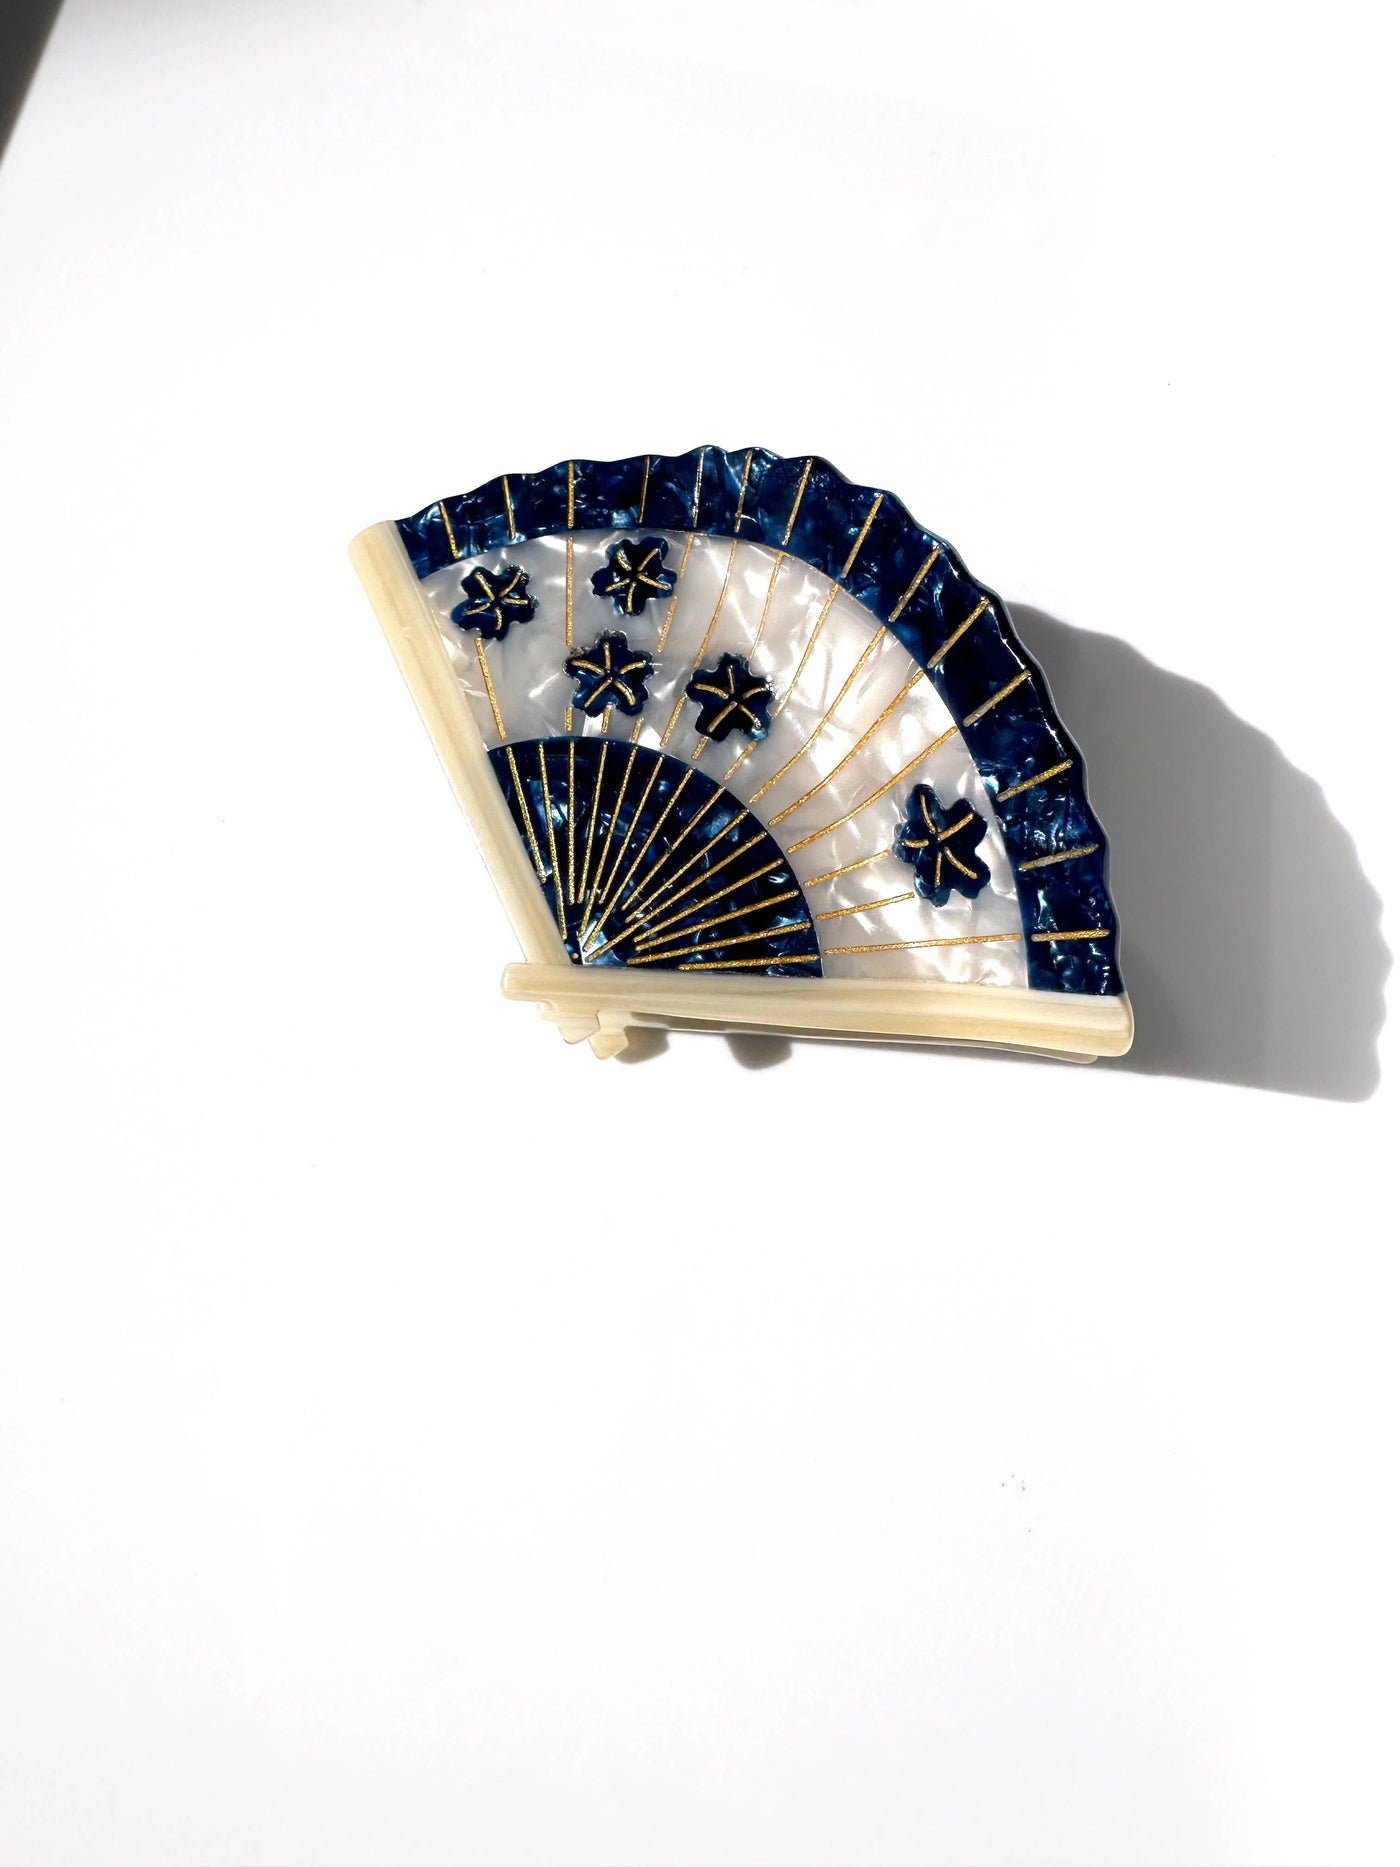 Hand-painted Blossom Fan Claw Hair Clip | Lunar New Year